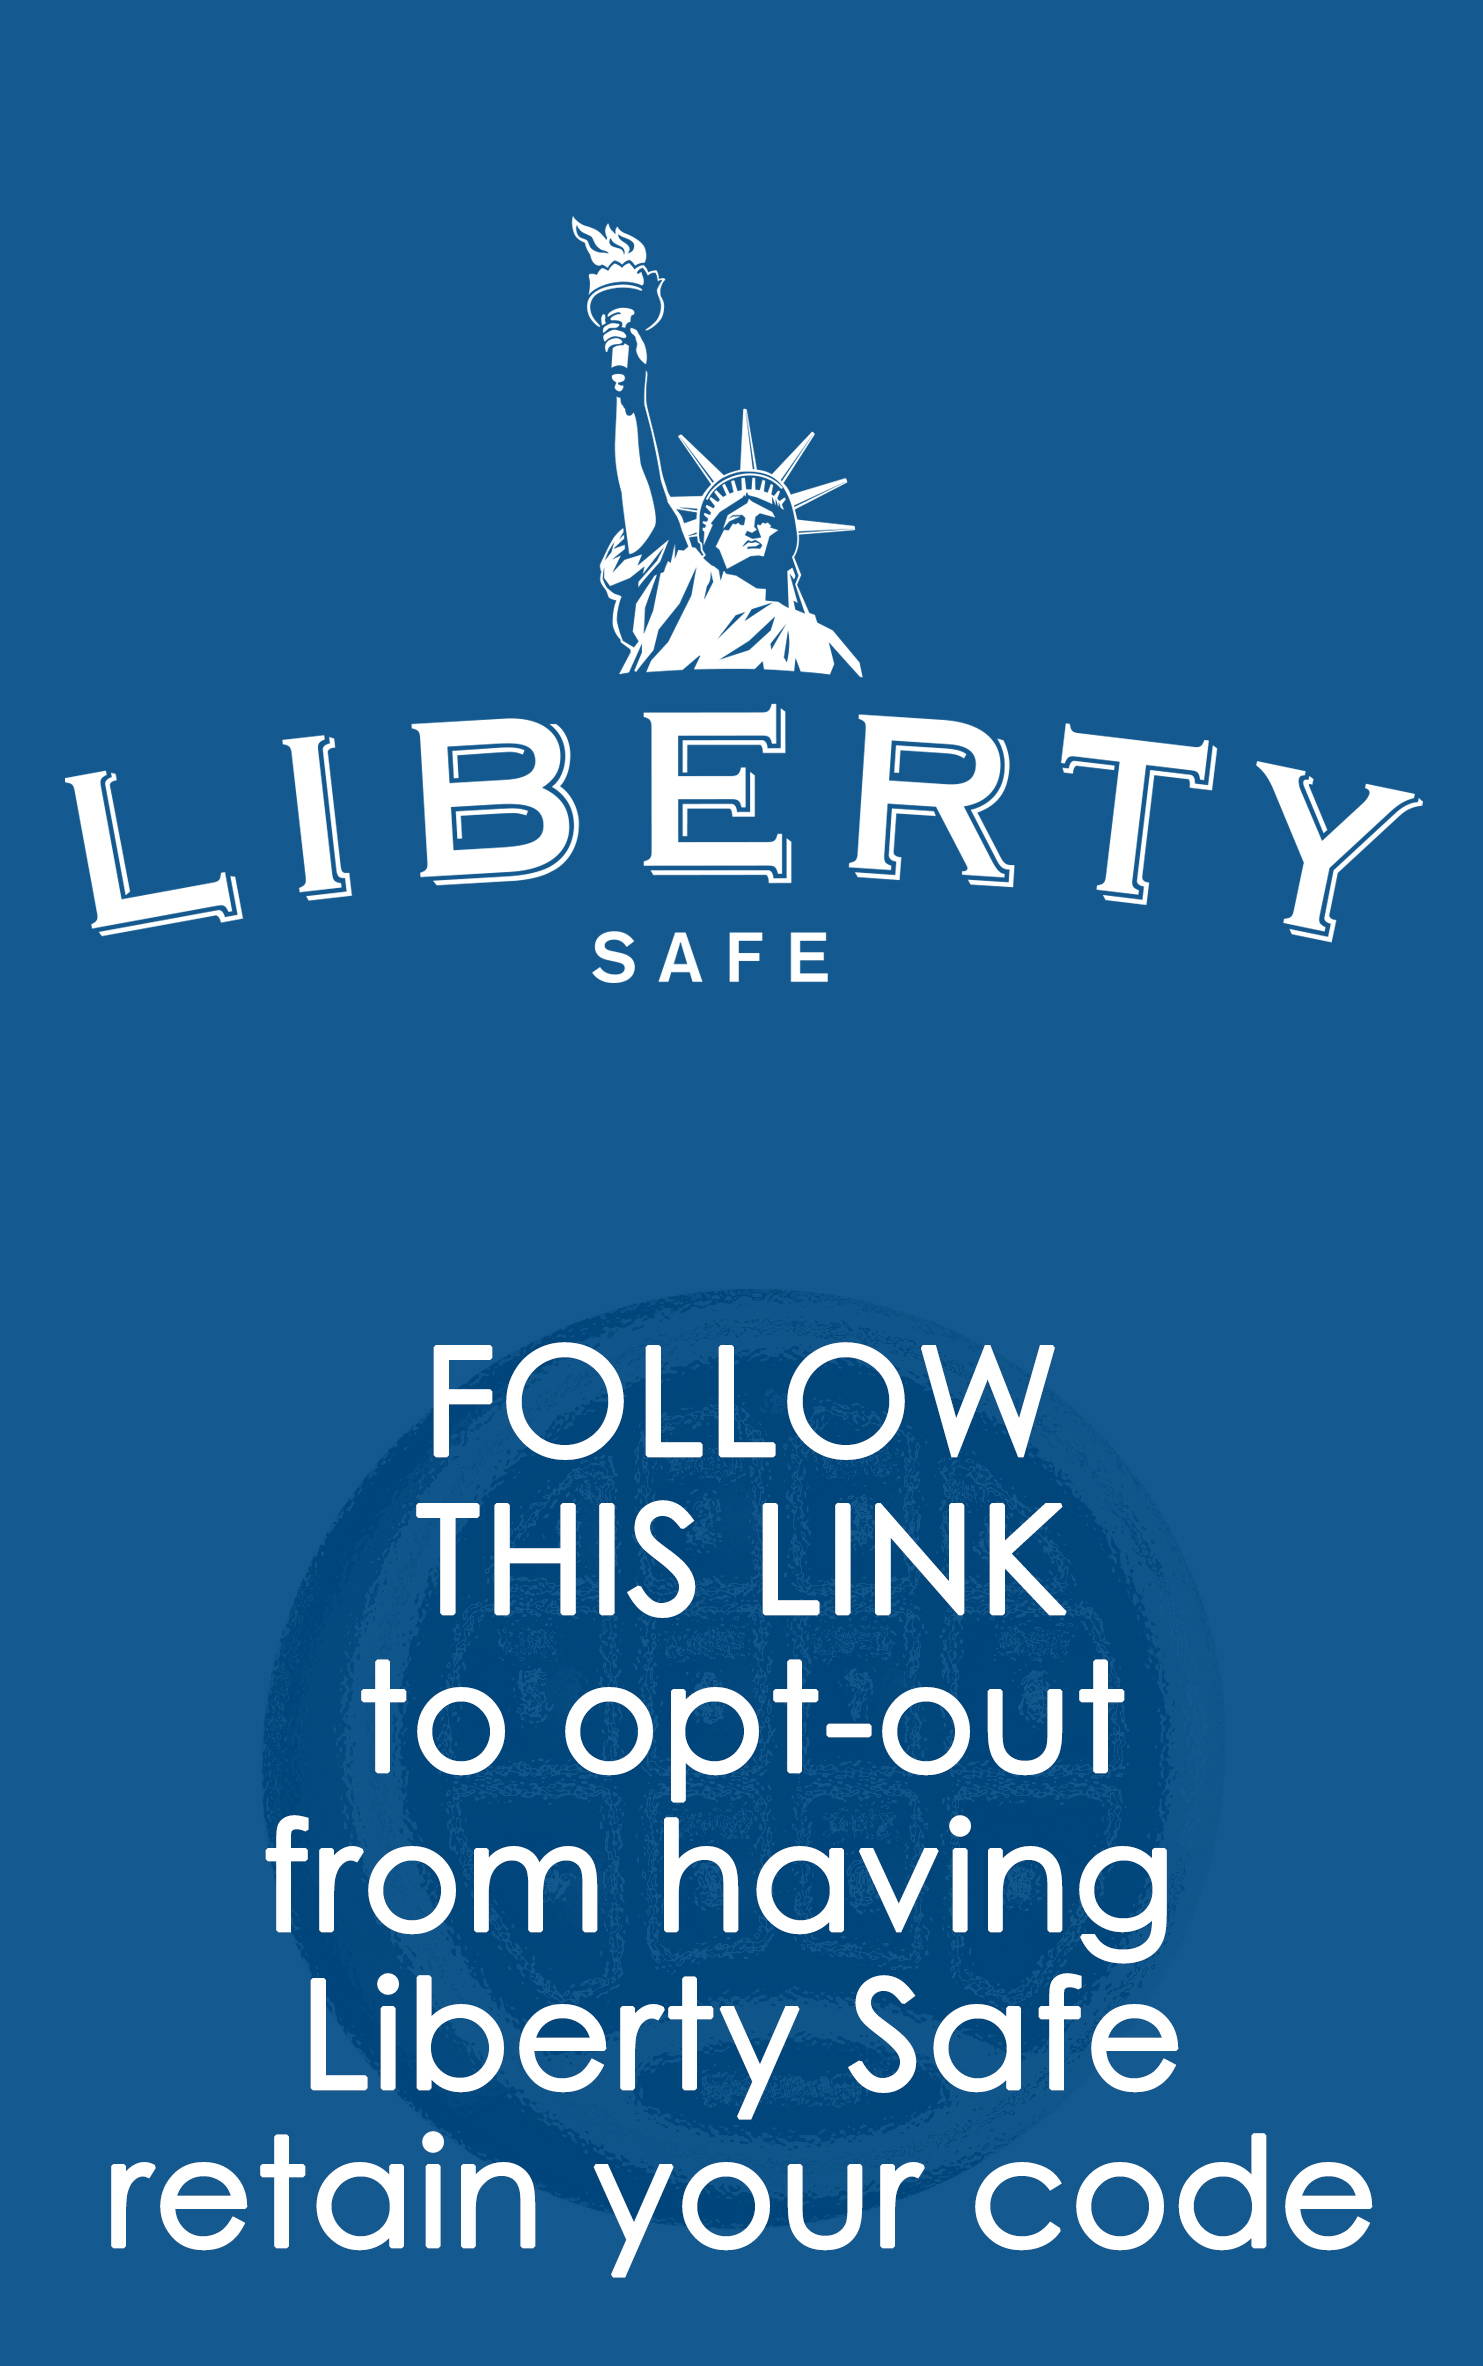 opt-out from having Liberty Safe retain your code.